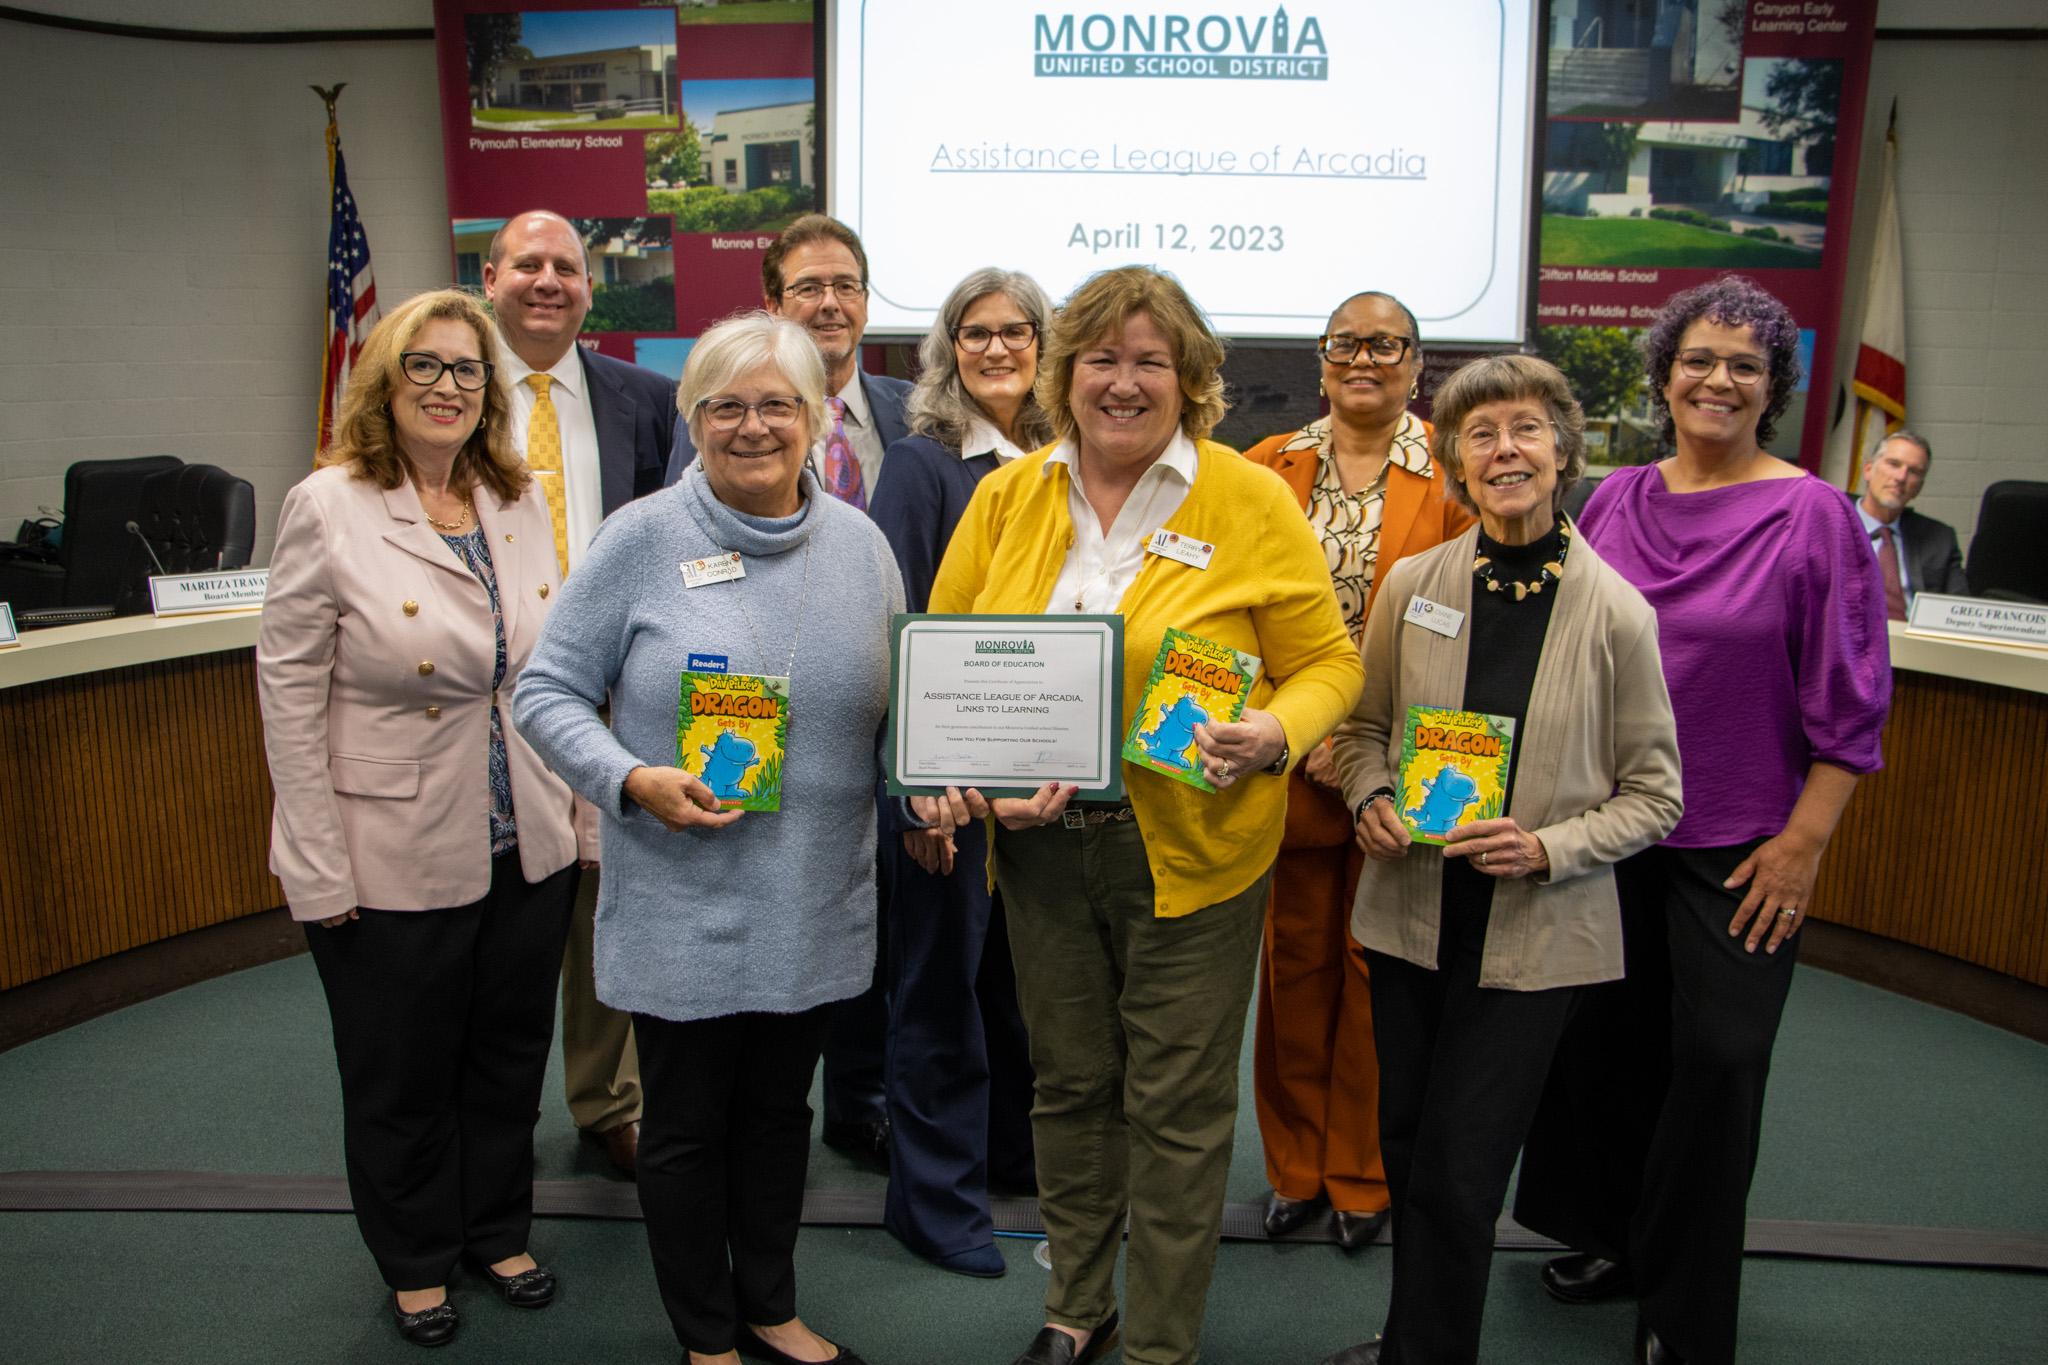 The Board recognized the Assistance League of Arcadia for donating $1,000 to each of our school libraries and giving each of our 2nd graders a copy of “Dragon Gets By.”